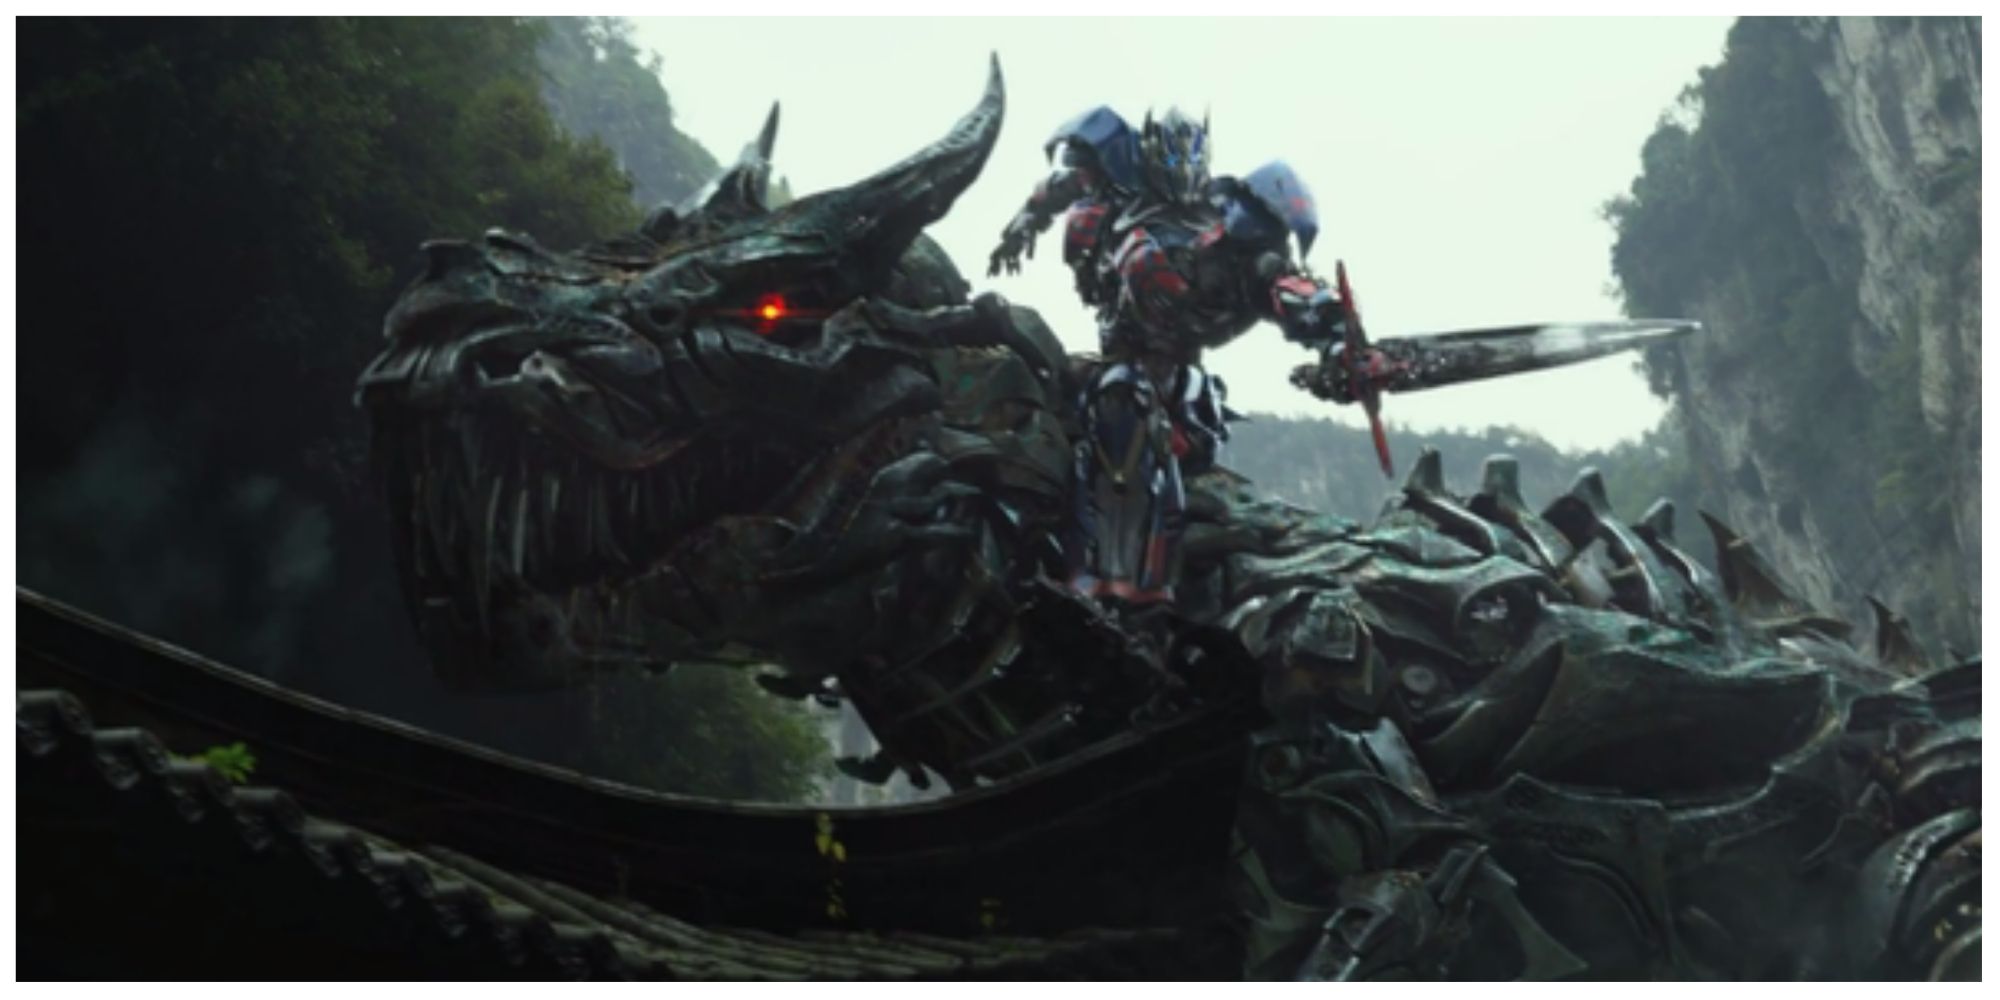 Optimus Prime and Dinobots in Transformers 4: Age of Extinction